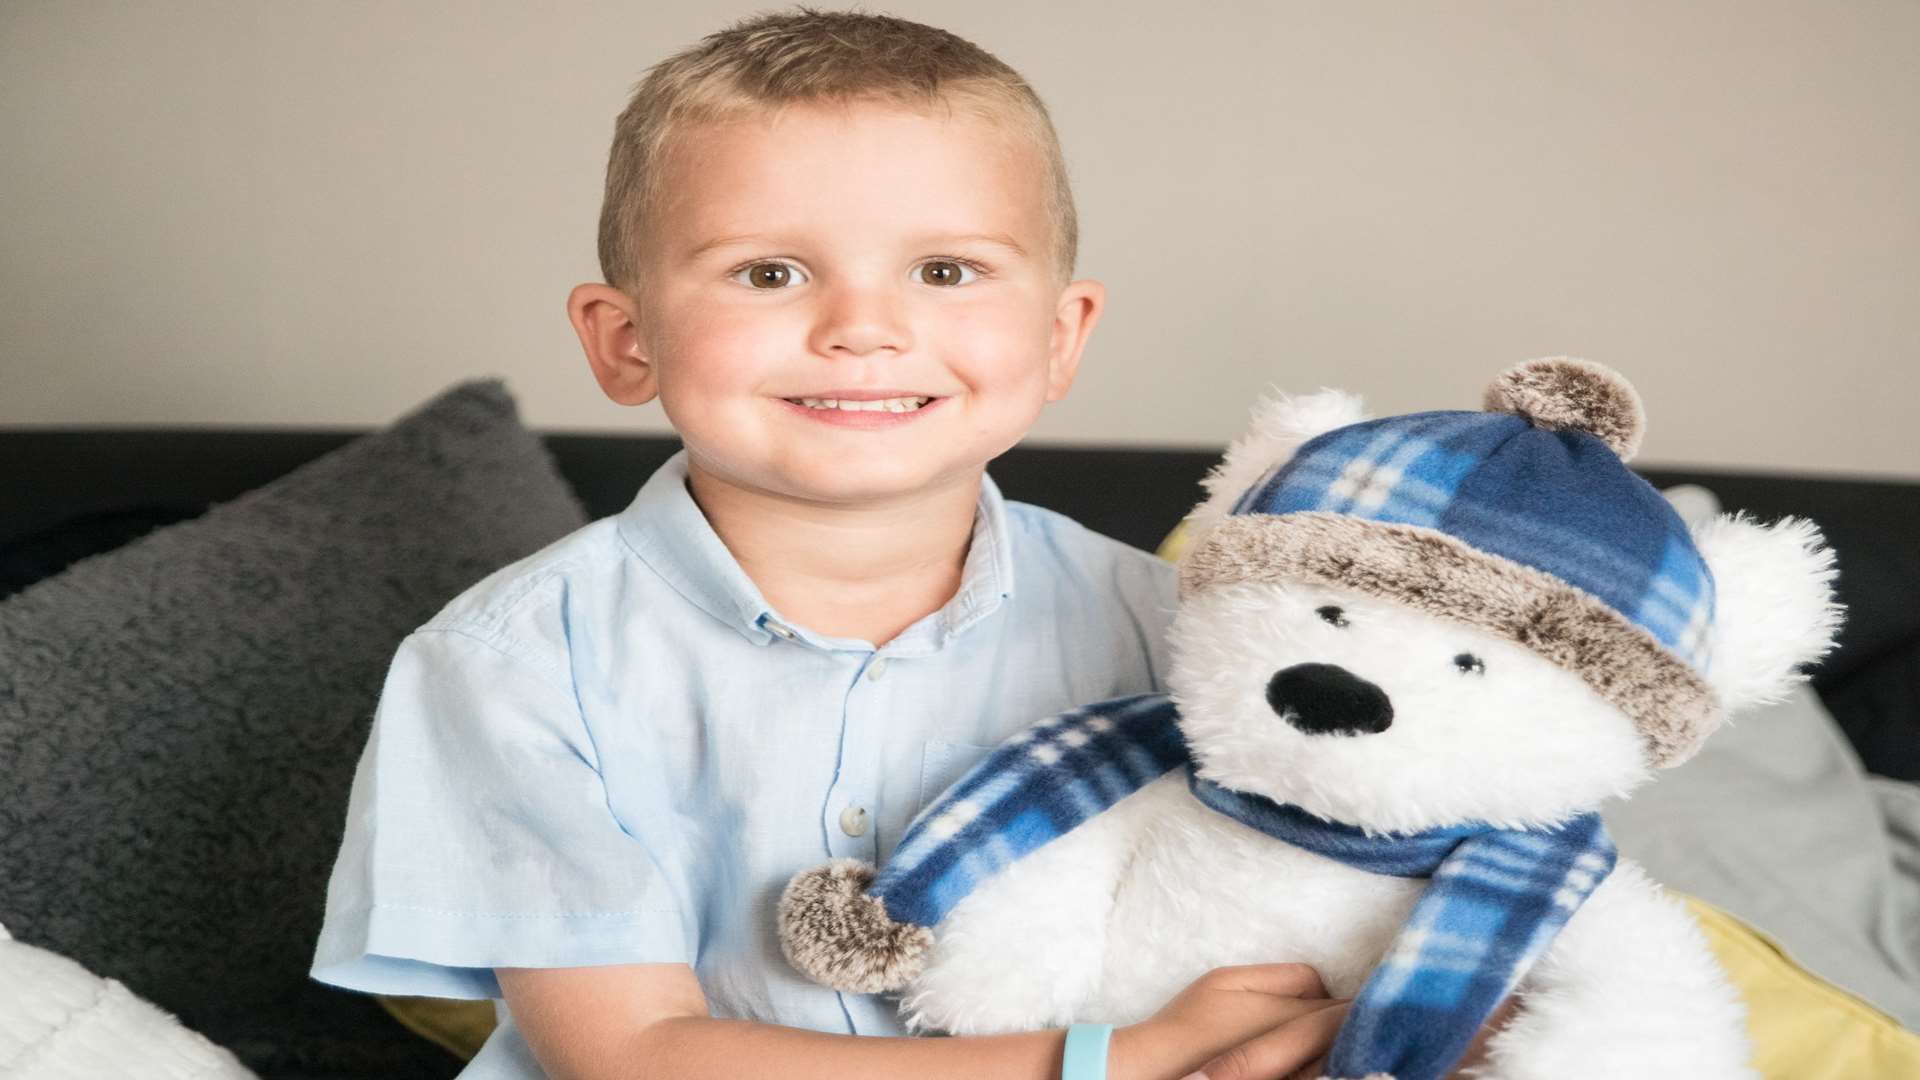 Harry Lucas with his CLIC Sargent Jasper the bear.